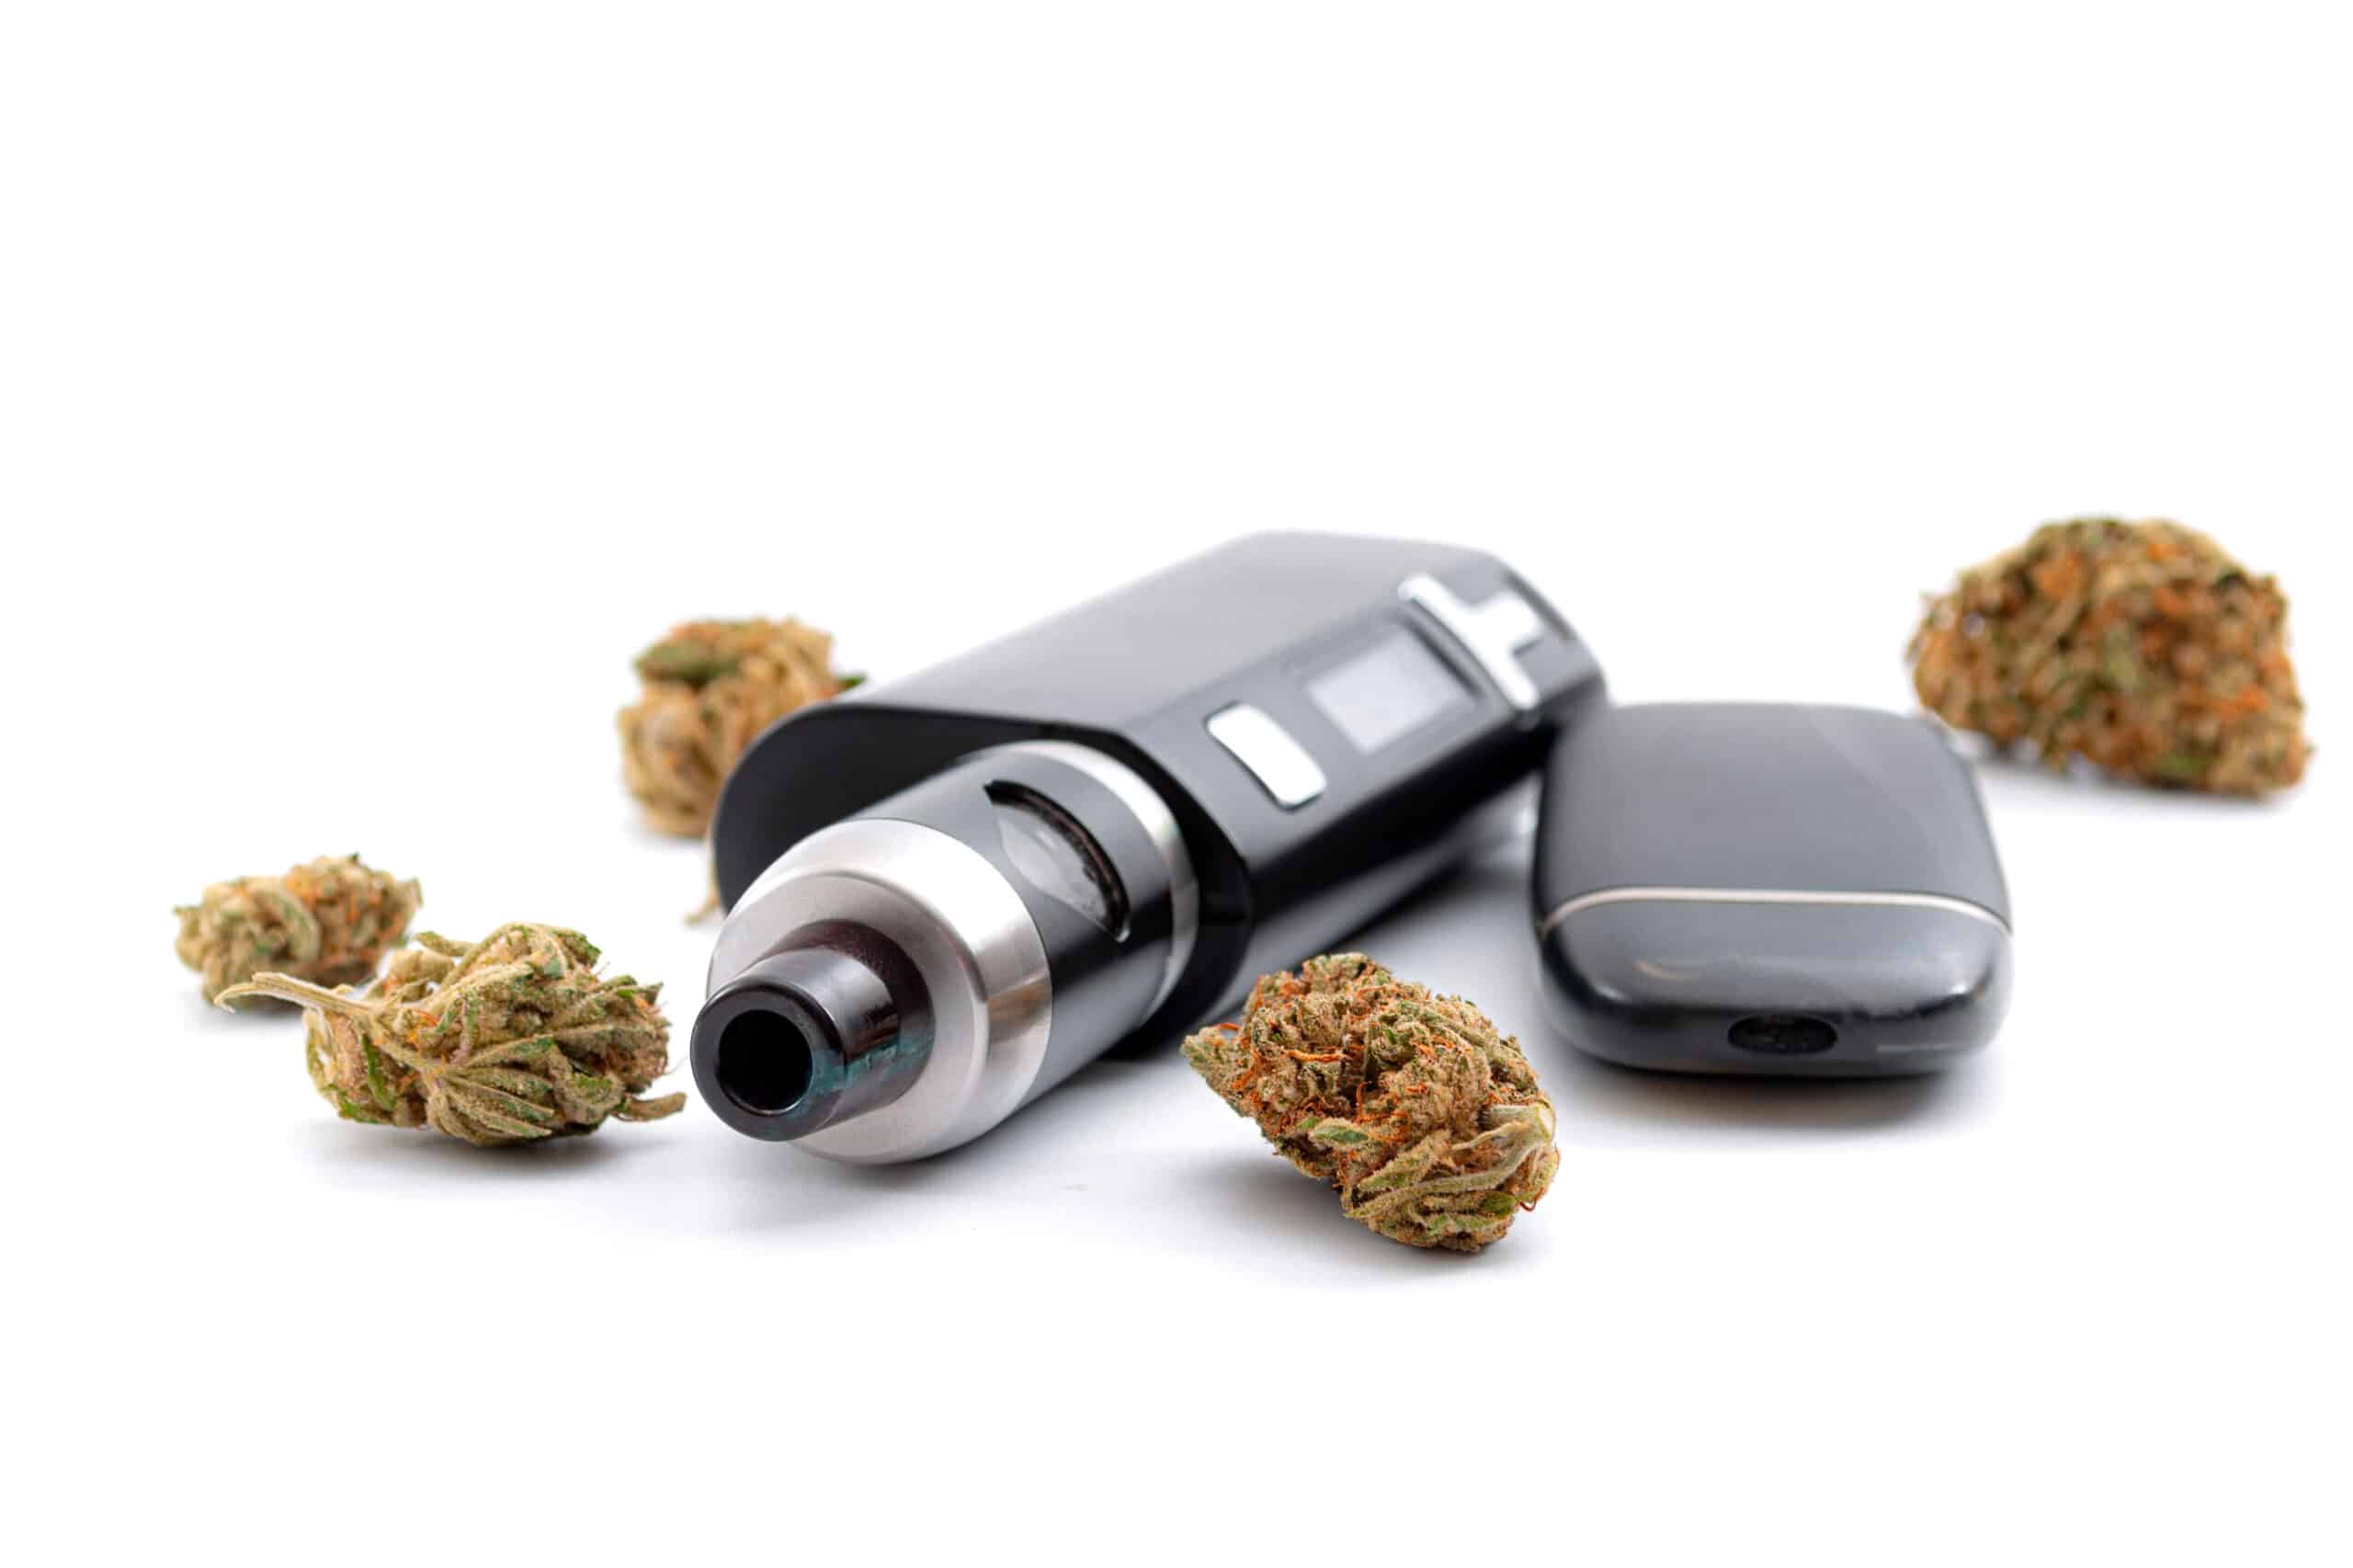 Smoking vs. Vaping Cannabis: Pros, Cons, and Differences